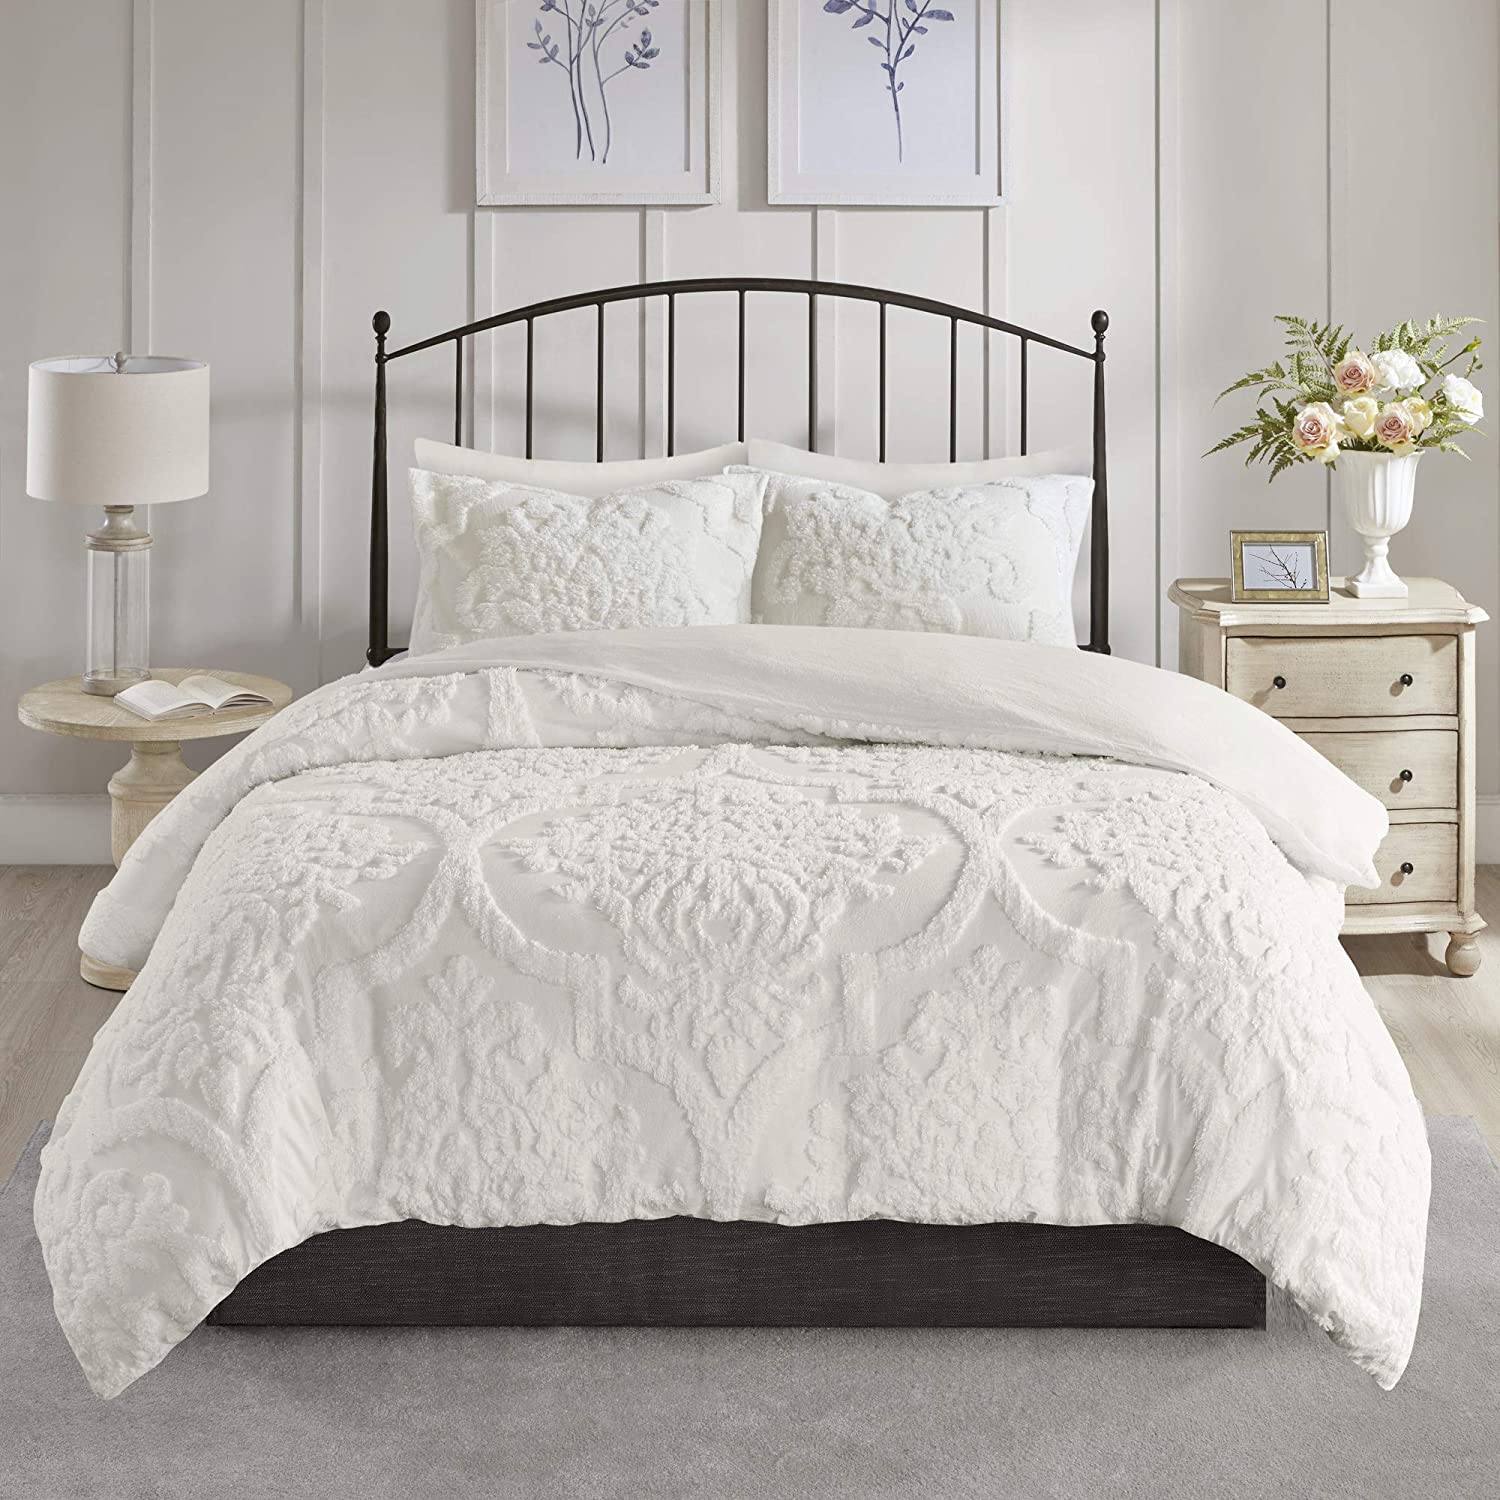 Price:$59.90  Park Tufted Chenille 100% Cotton Duvet- Modern Luxe All Season Comforter Cover Bed Set with Matching Shams, Viola, Damask White King/Cal King(104"x92") 3 Piece : Home & Kitchen